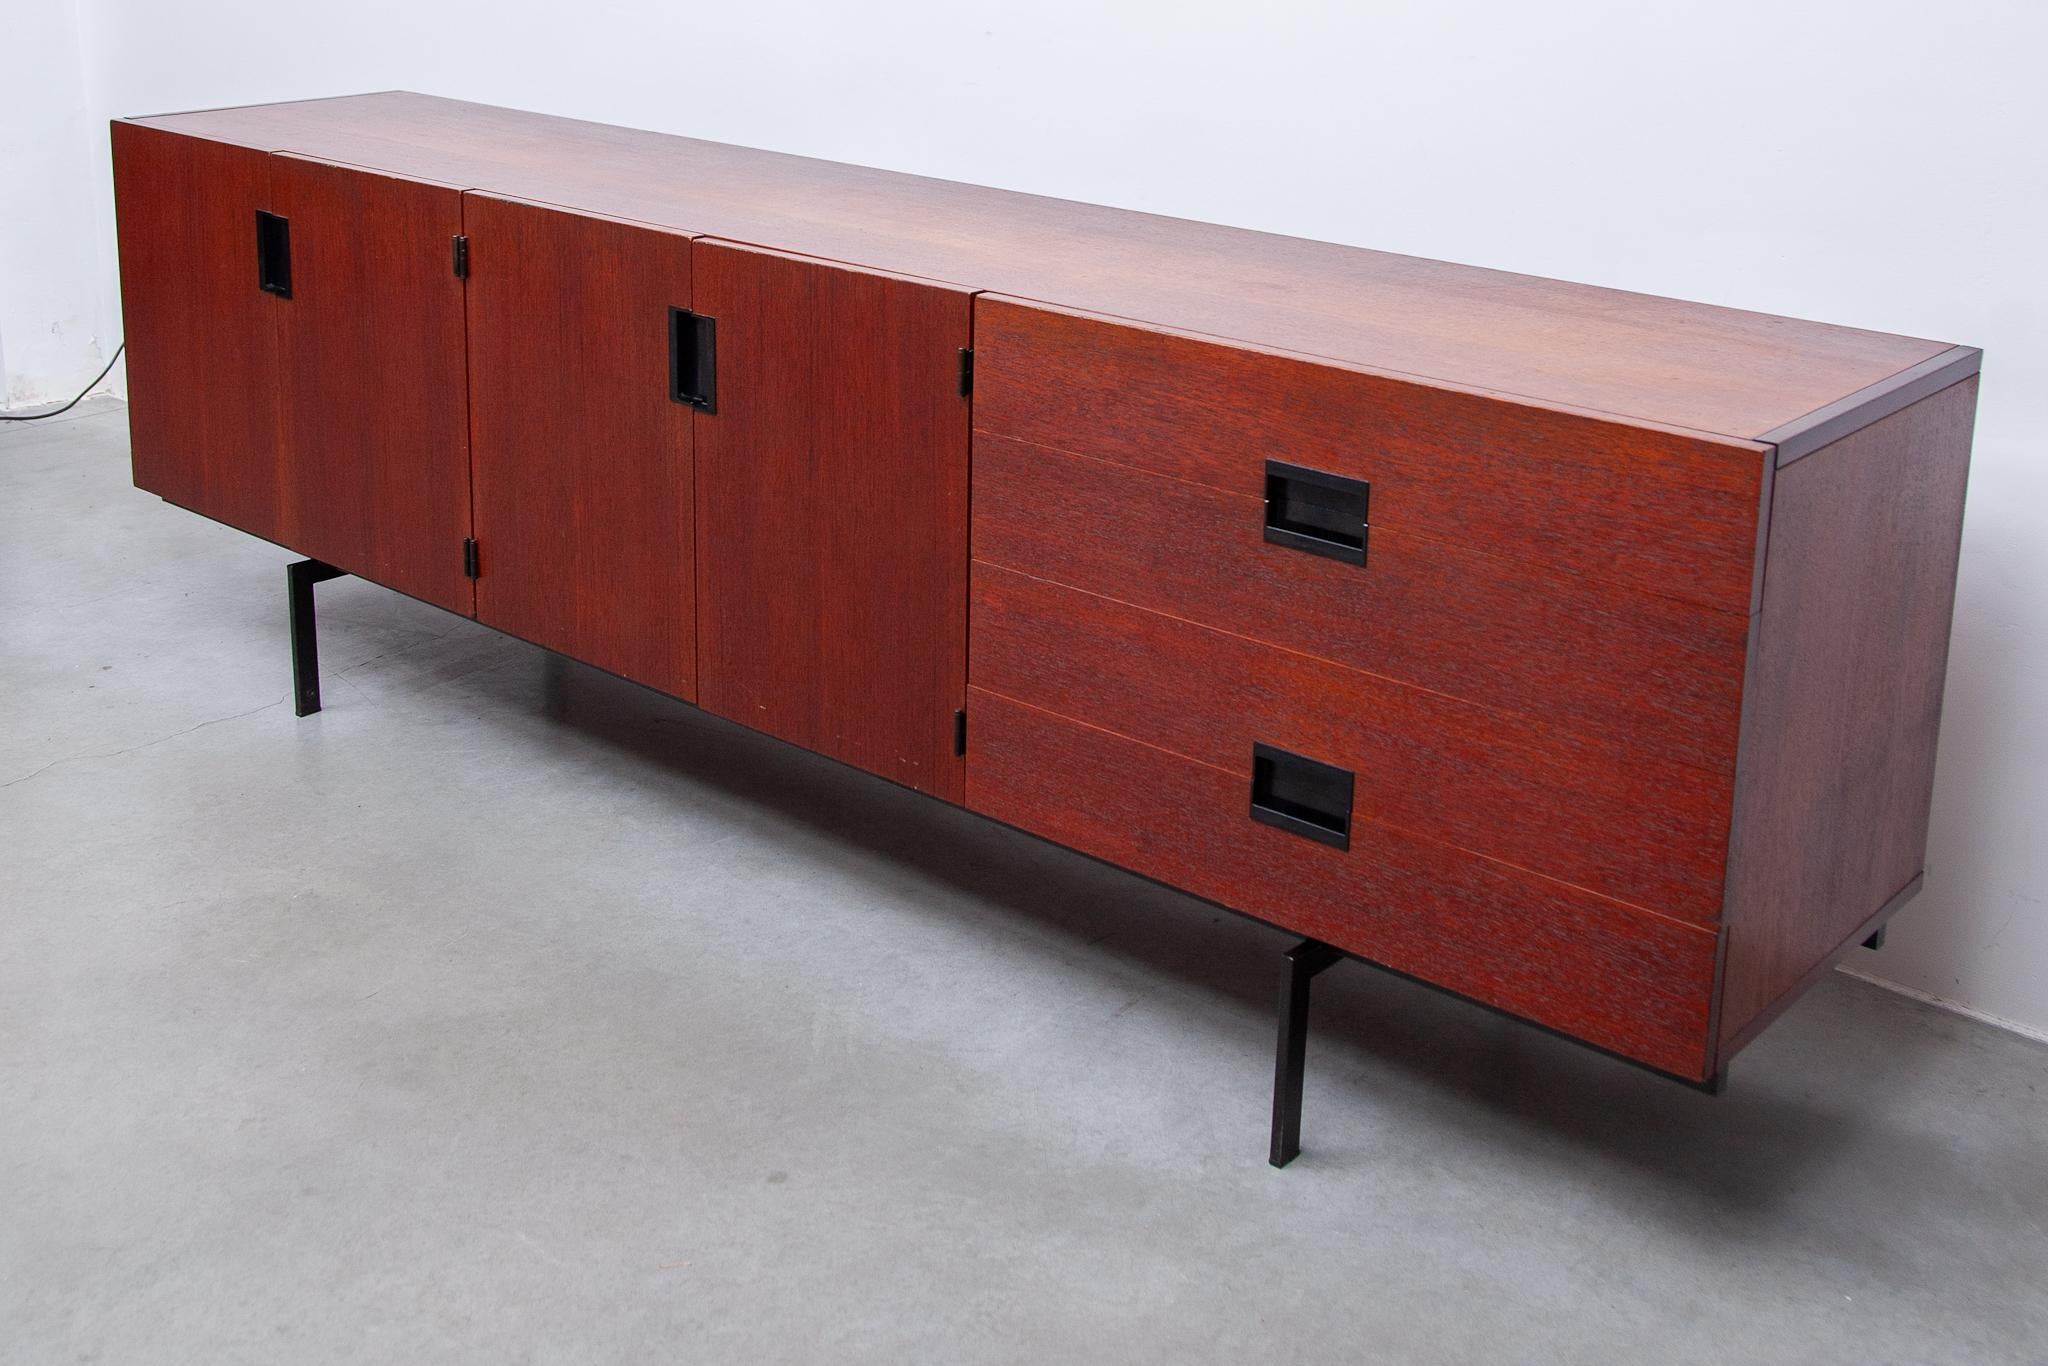 Japanese Serie DU03  Sideboard by Cees Braakman for Pastoe 1958, Dutch design For Sale 4